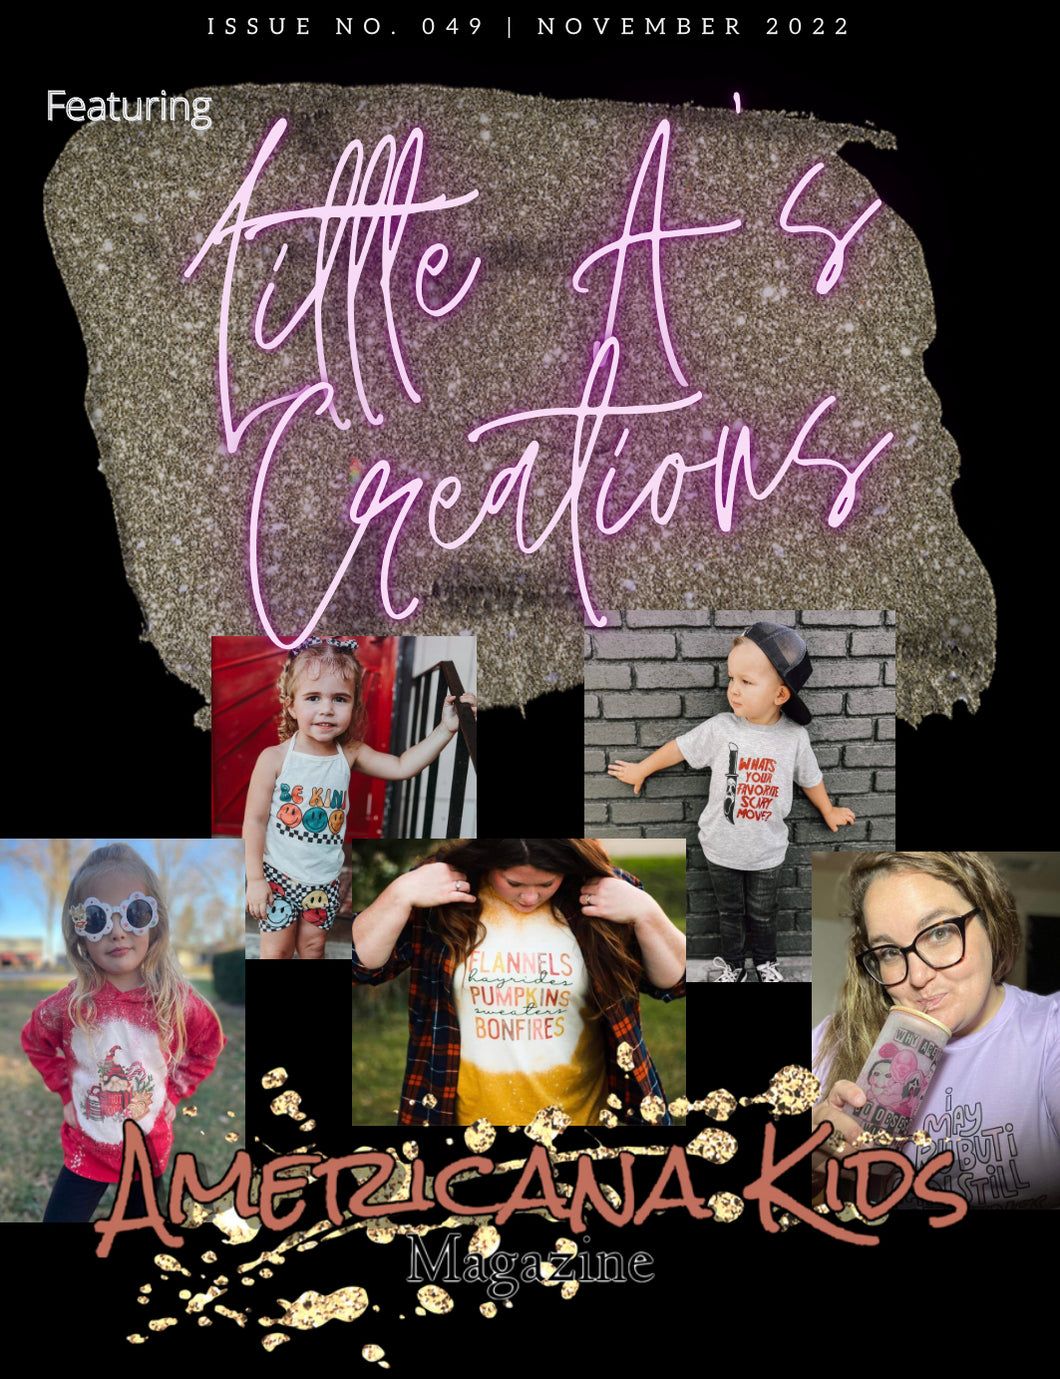 Issue #049 - Featuring Little A's Creations